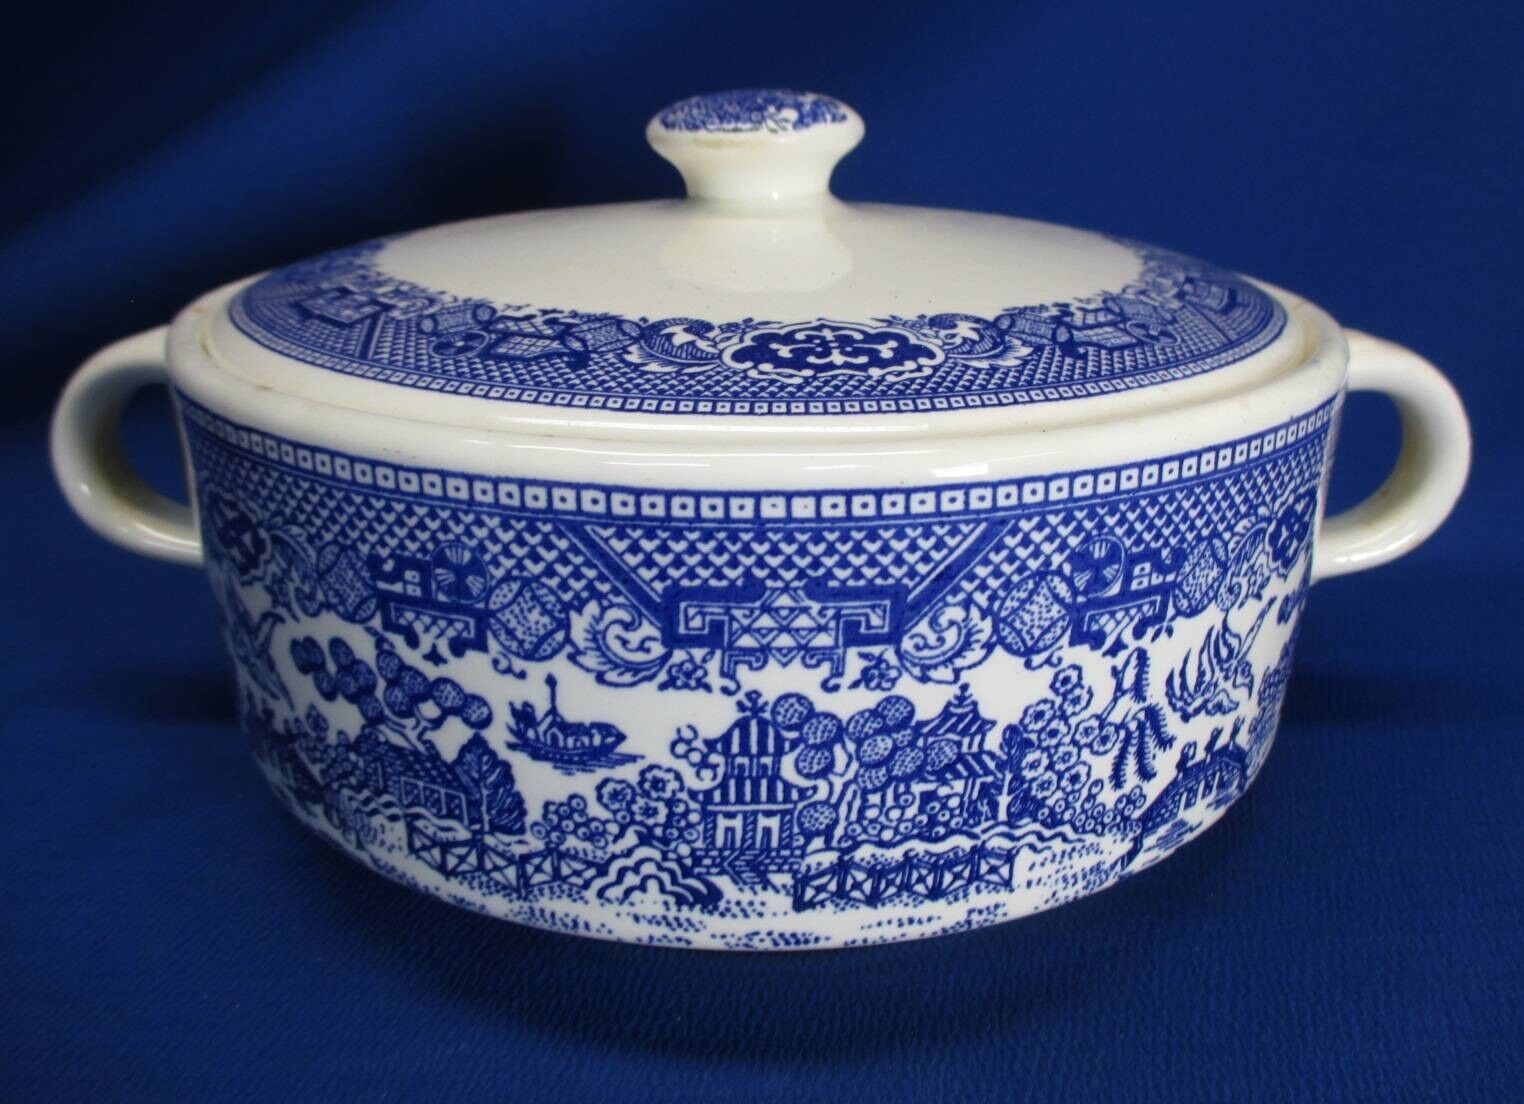 ROYAL CHINA WILLOW WARE HANDLED LIDDED SERVING TUREEN